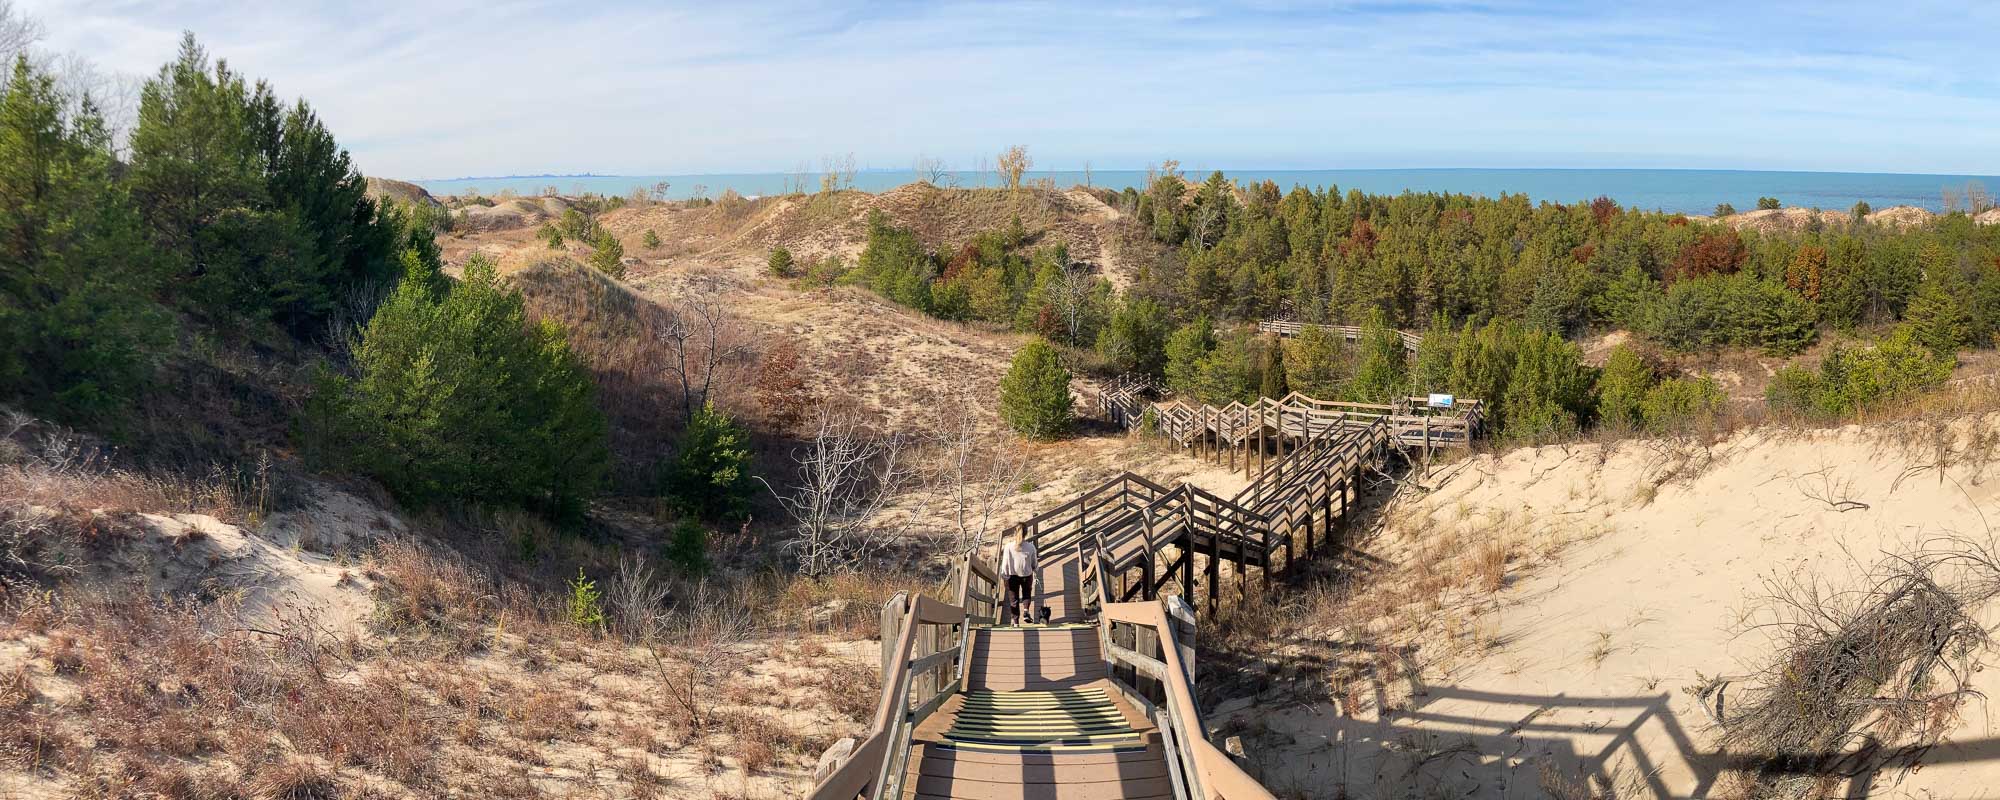 Dune Succession Trail boardwalk panorama in Indiana Dunes National Park